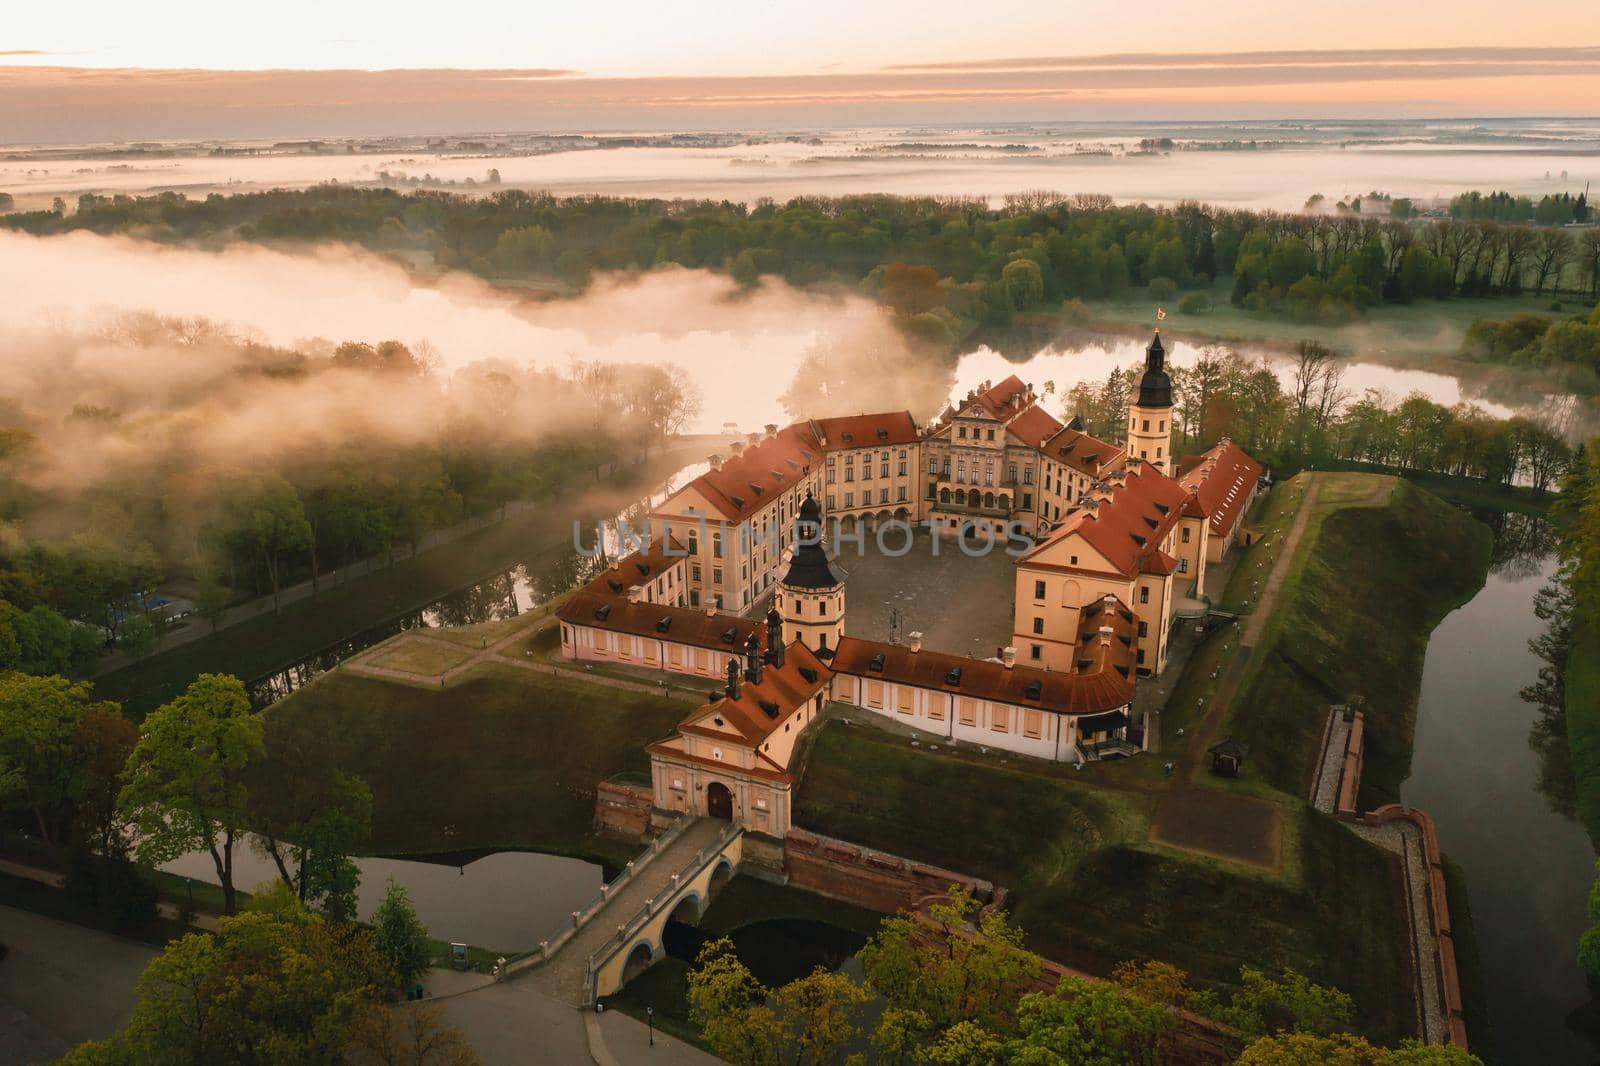 Nesvizh castle is a residential castle of the Radziwill family in Nesvizh, Belarus, with a beautiful view from above at dawn.